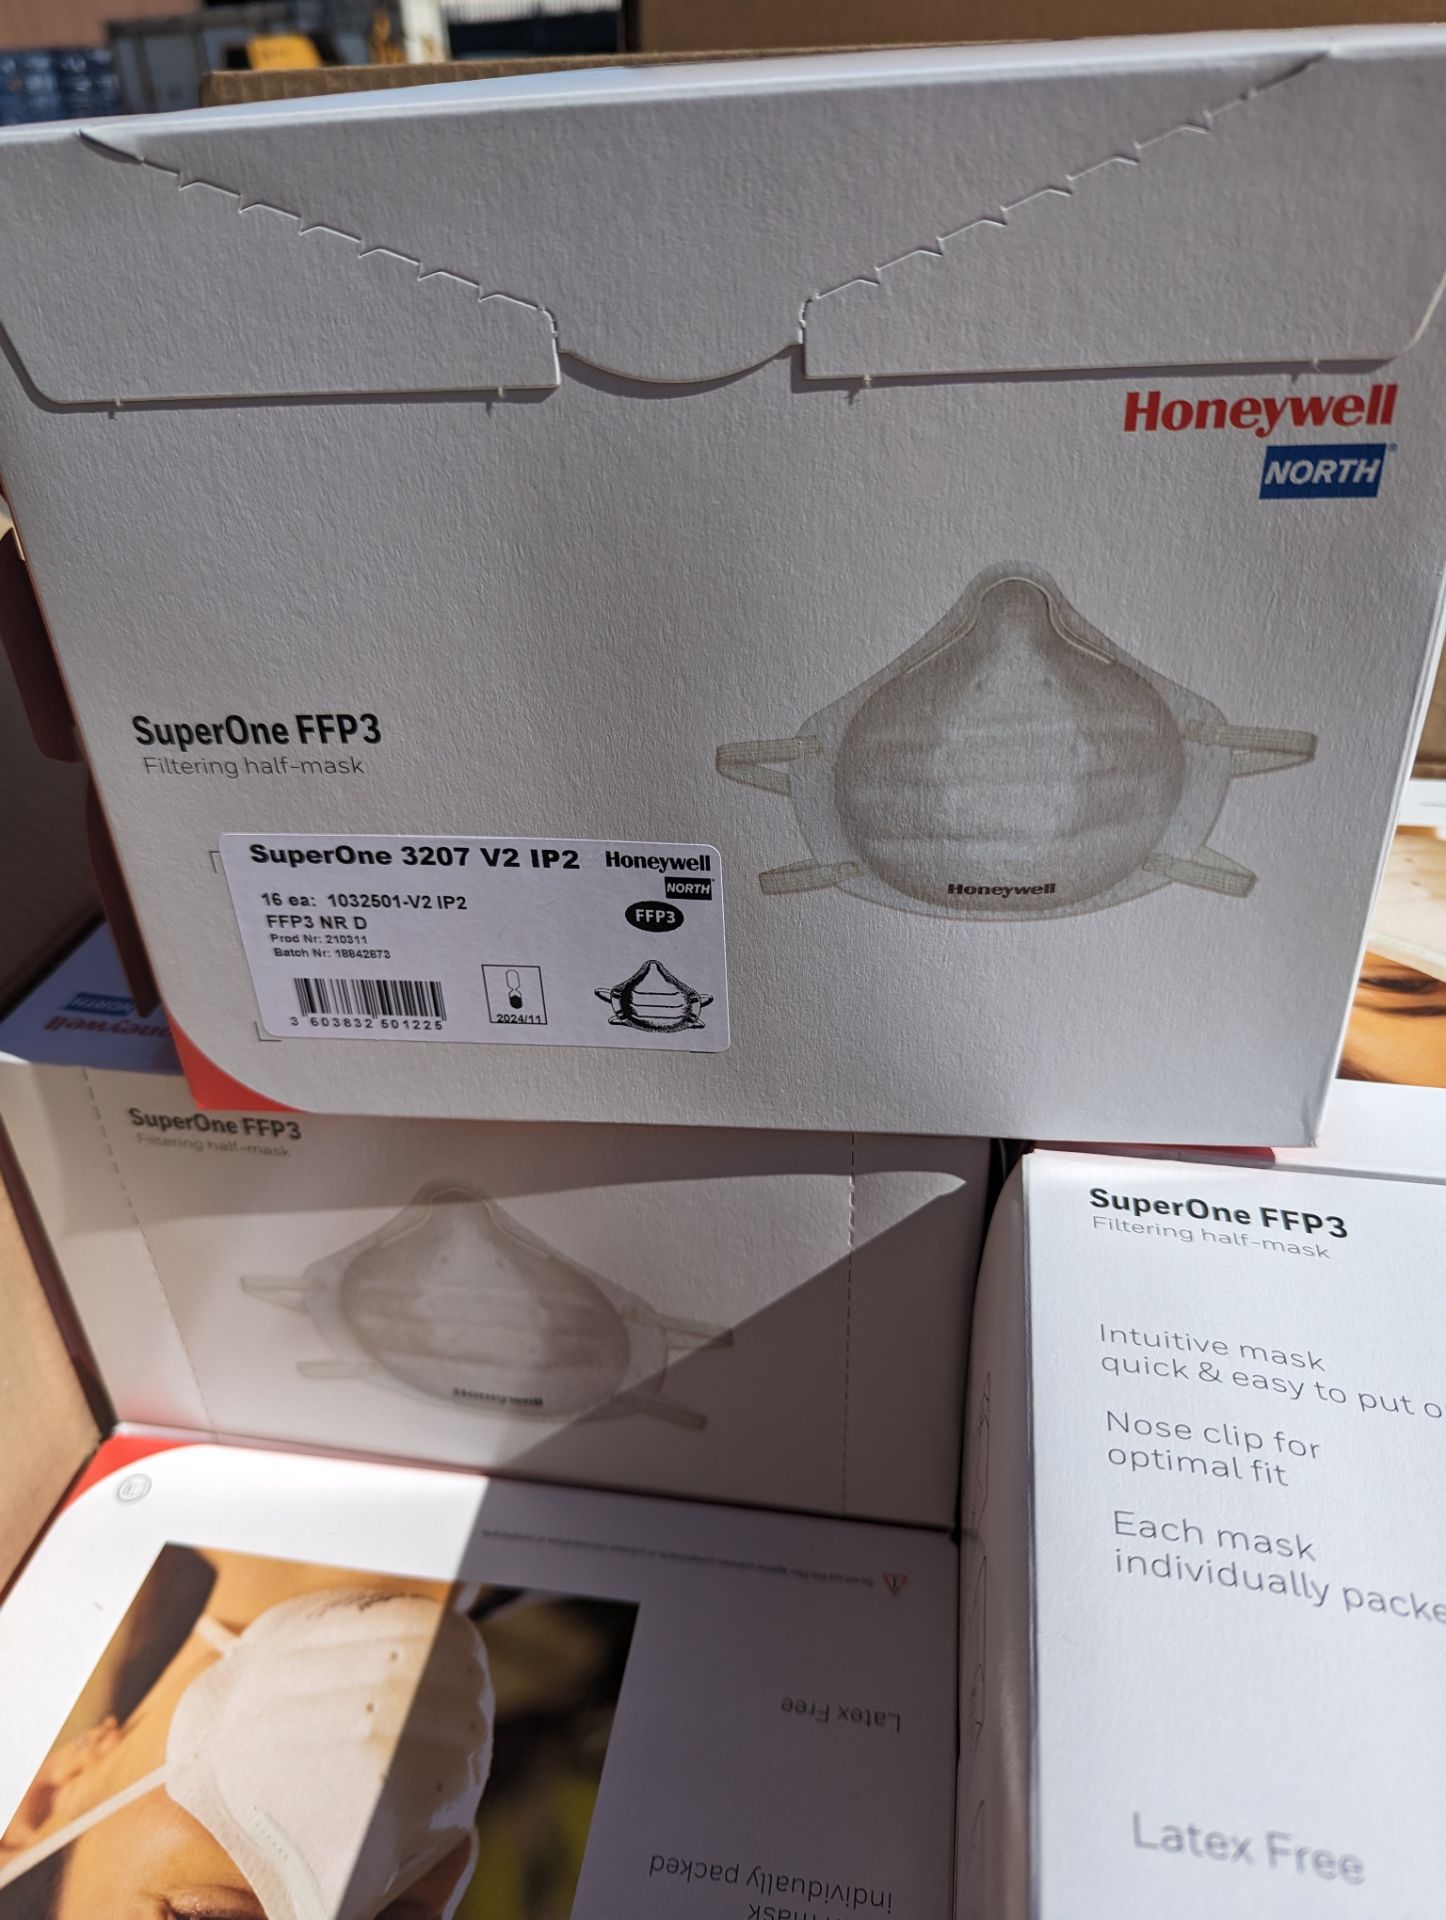 4x Boxes Honeywell SuperOne V2 ip2 FFP3 Half Mask Filter, 12 Packs of 16 Units Each Per Box - Image 4 of 6